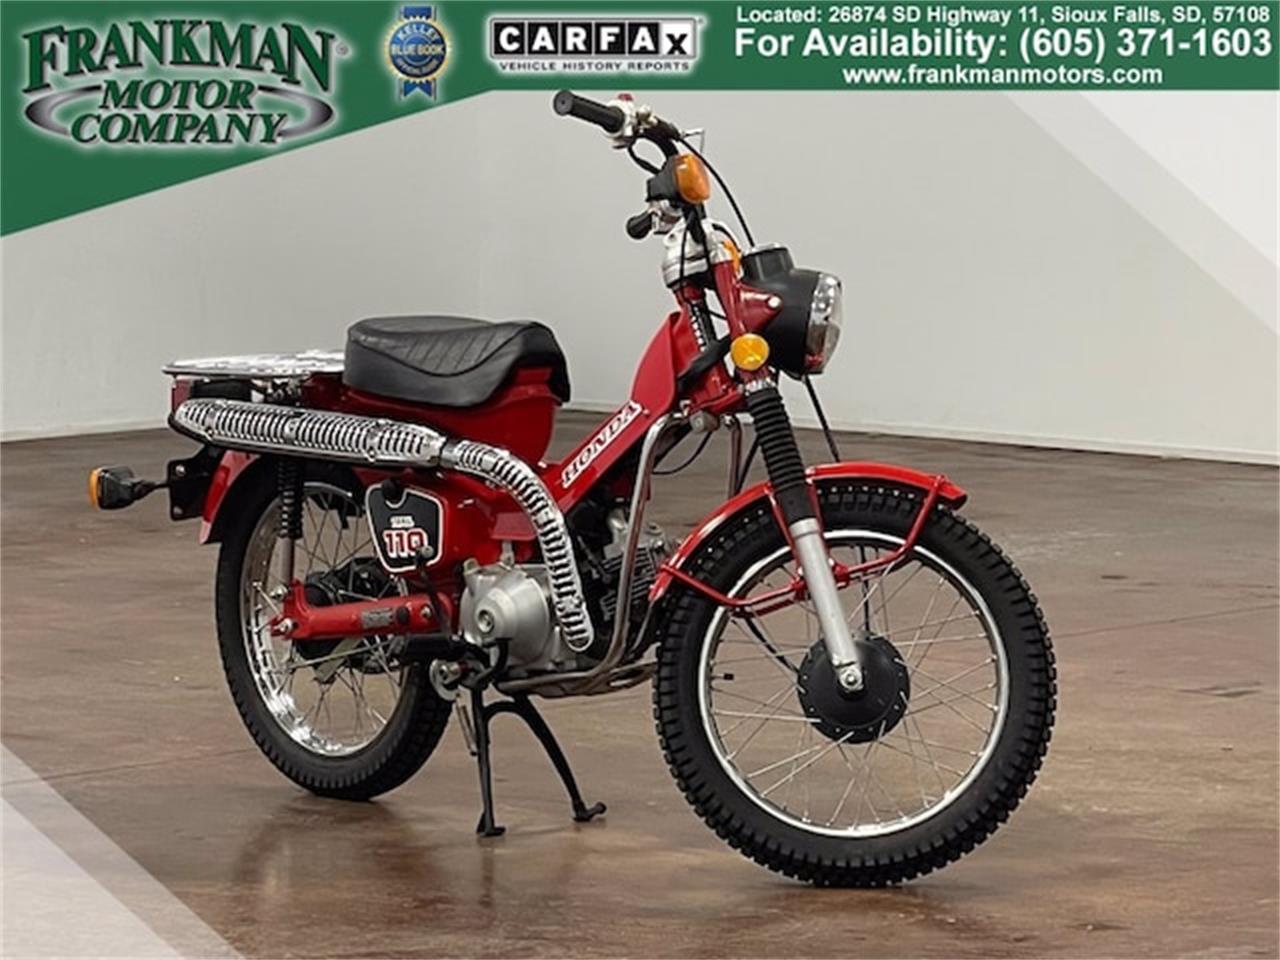 1986 Honda Motorcycle for sale in Sioux Falls, SD